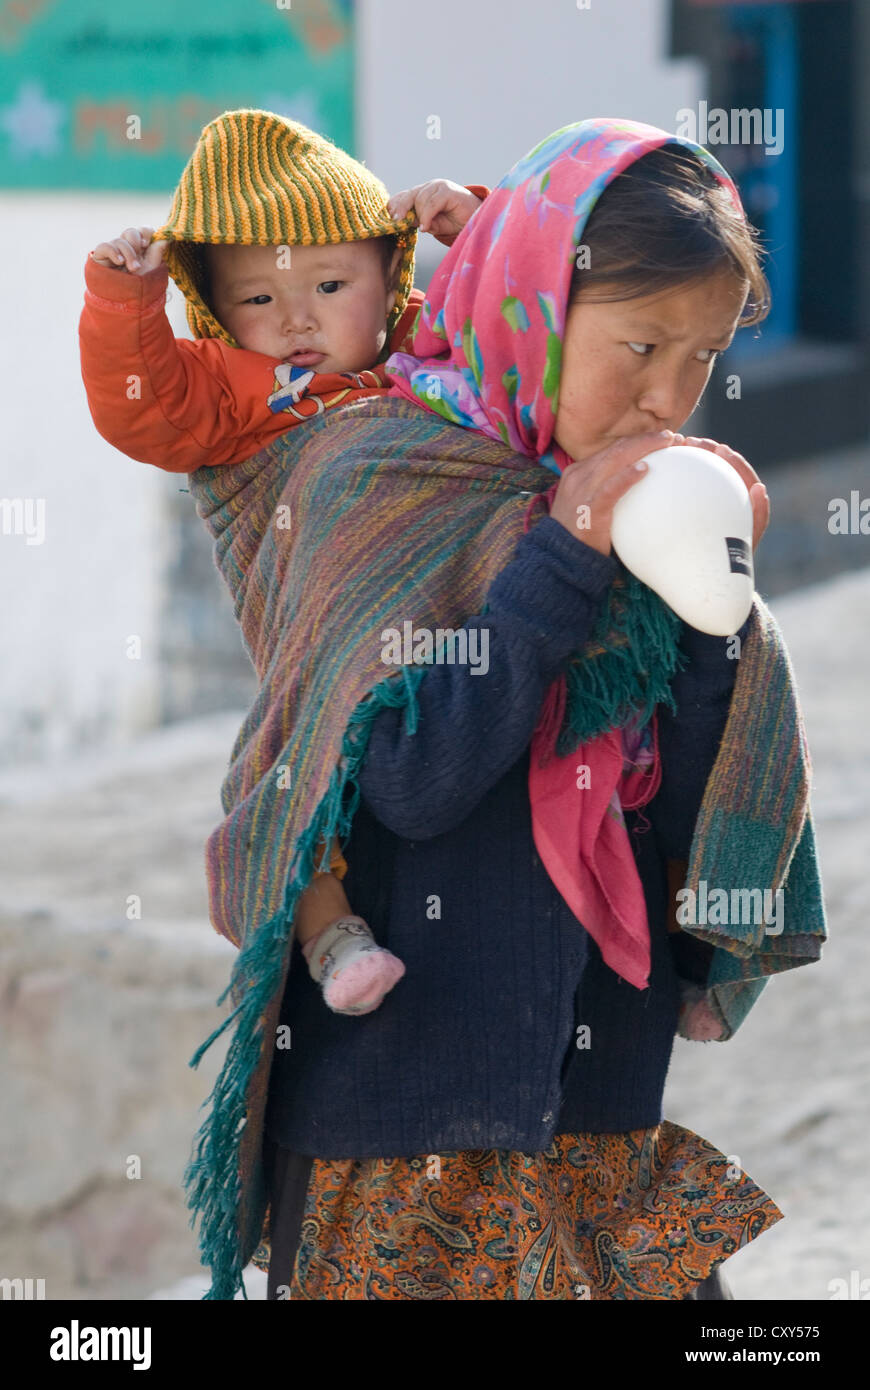 A young girl carries her sibling, slung across her back, in Mud village, Spiti, Northern India Stock Photo